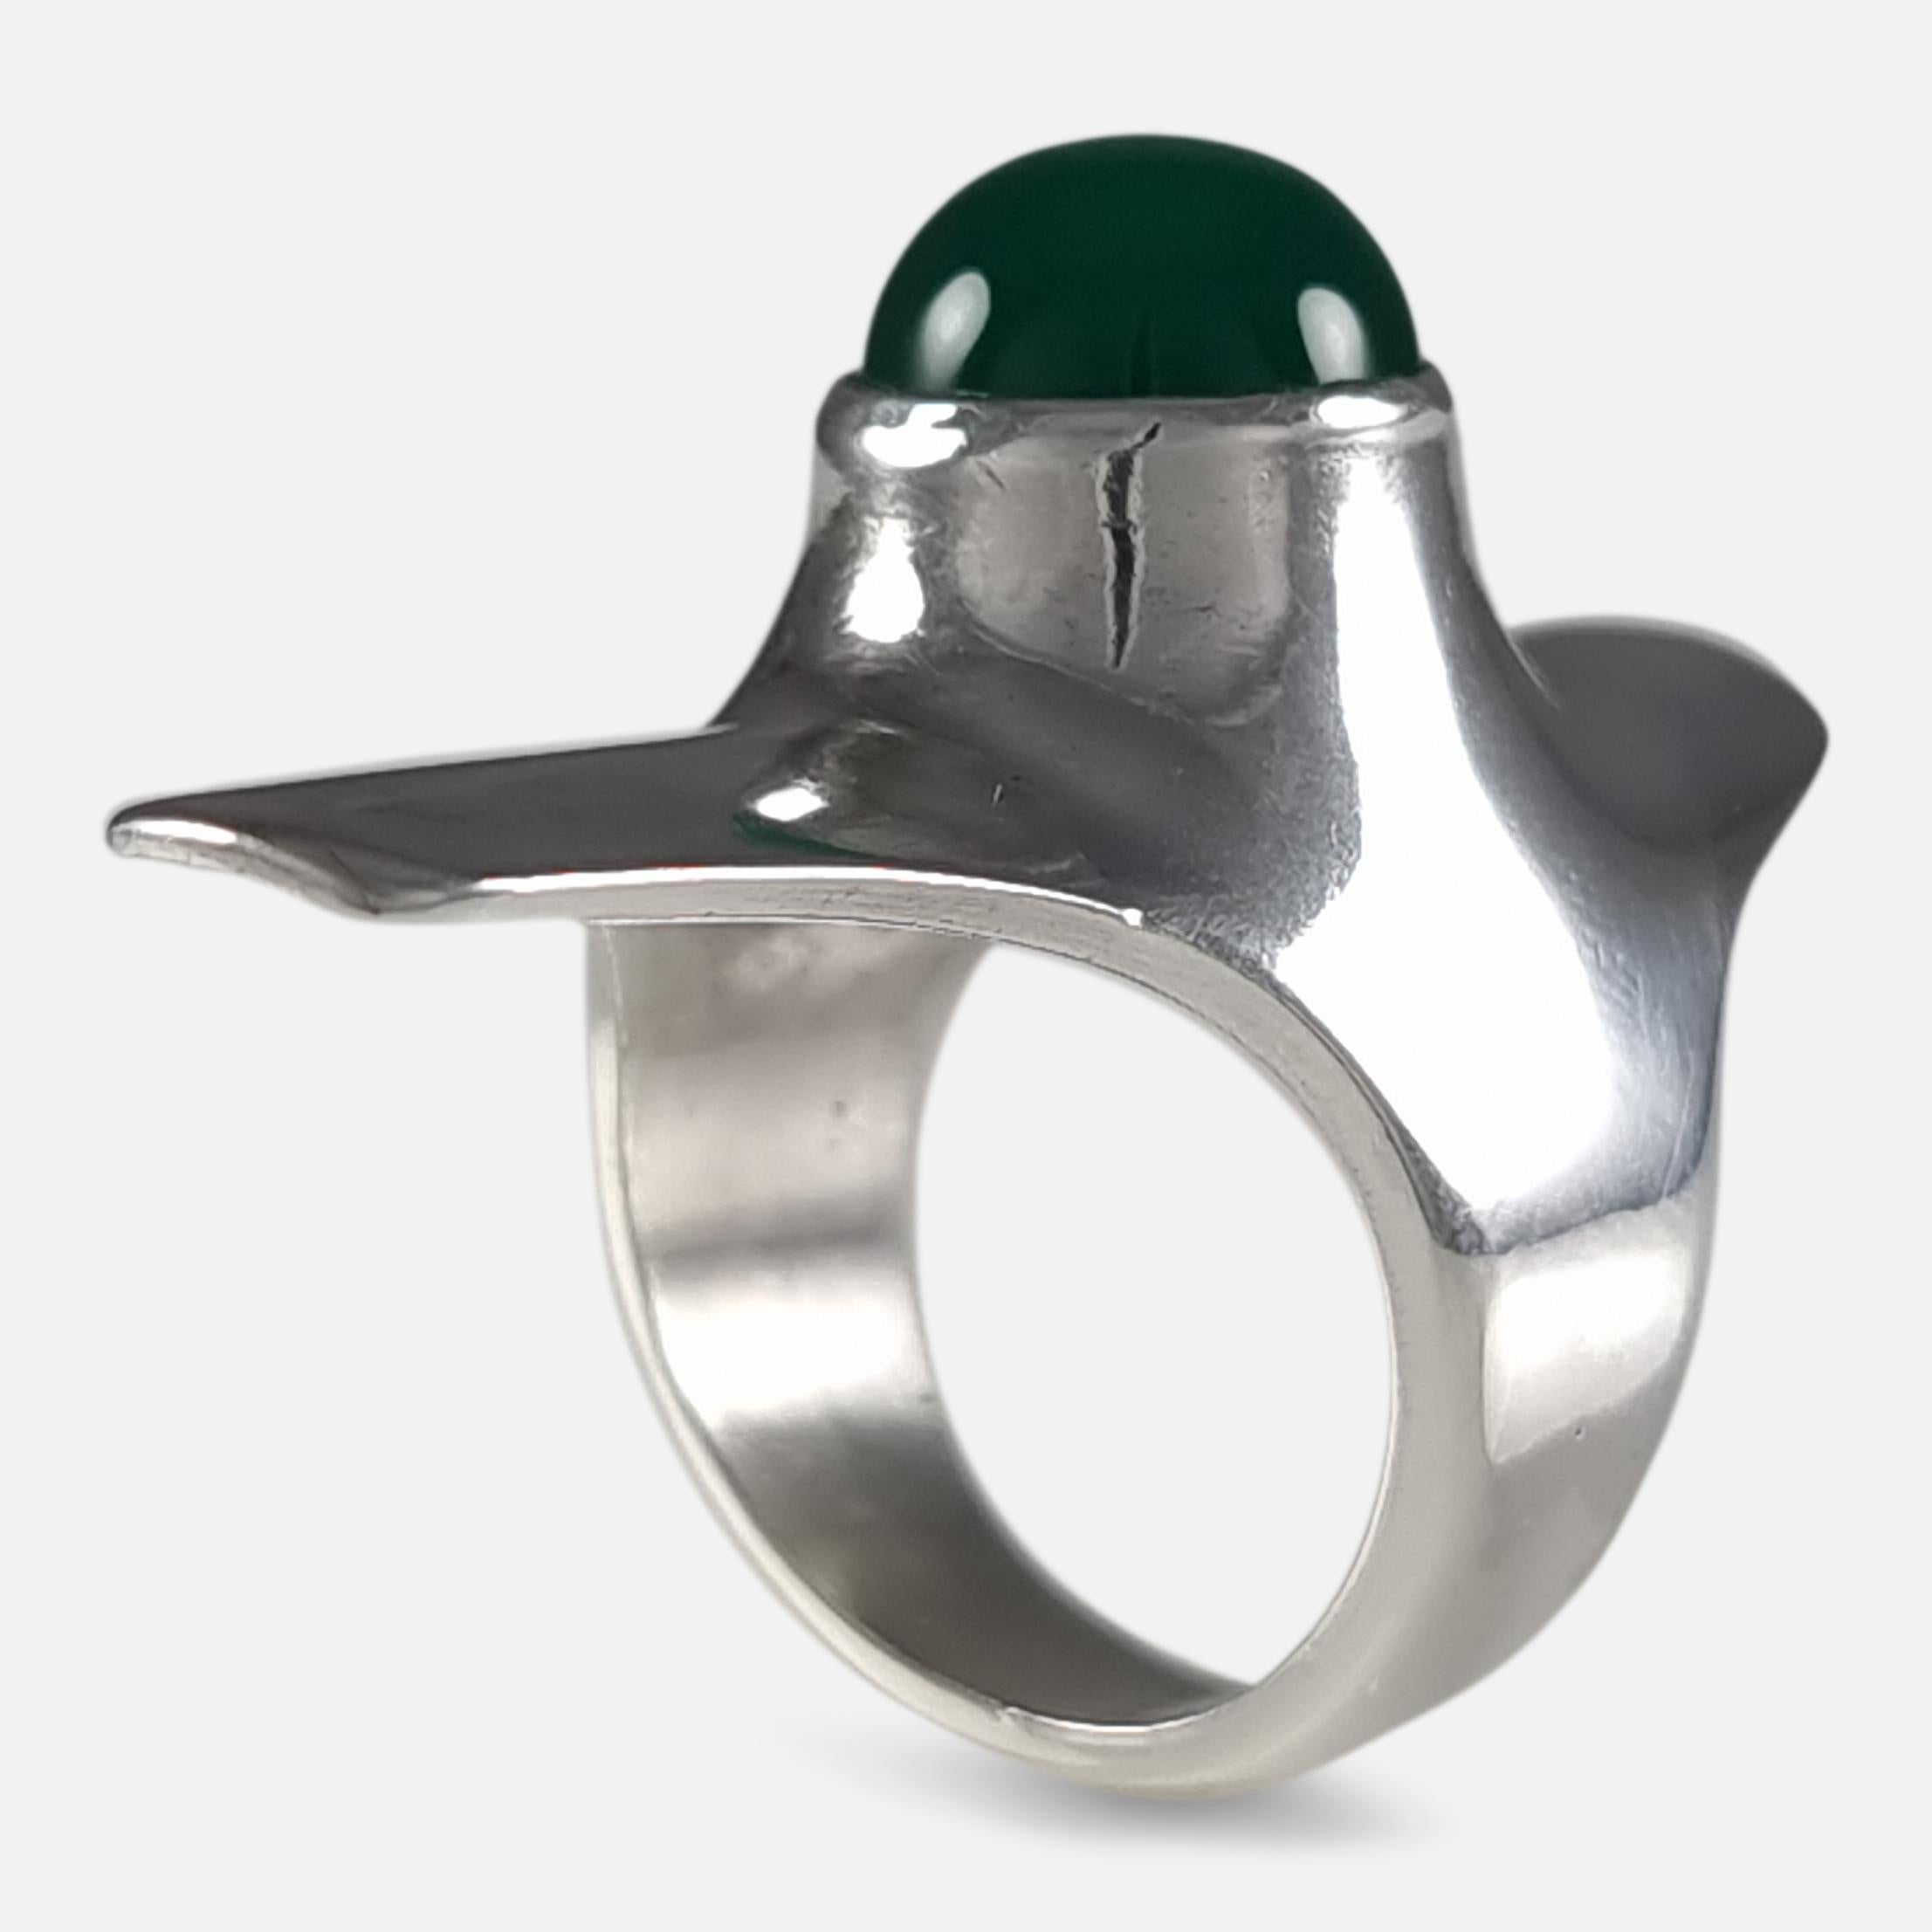 A Georg Jensen sterling silver and Chrysoprase modernist ring #154, design by Henning Koppel. 

Stamped Georg Jensen within dotted oval mark, 